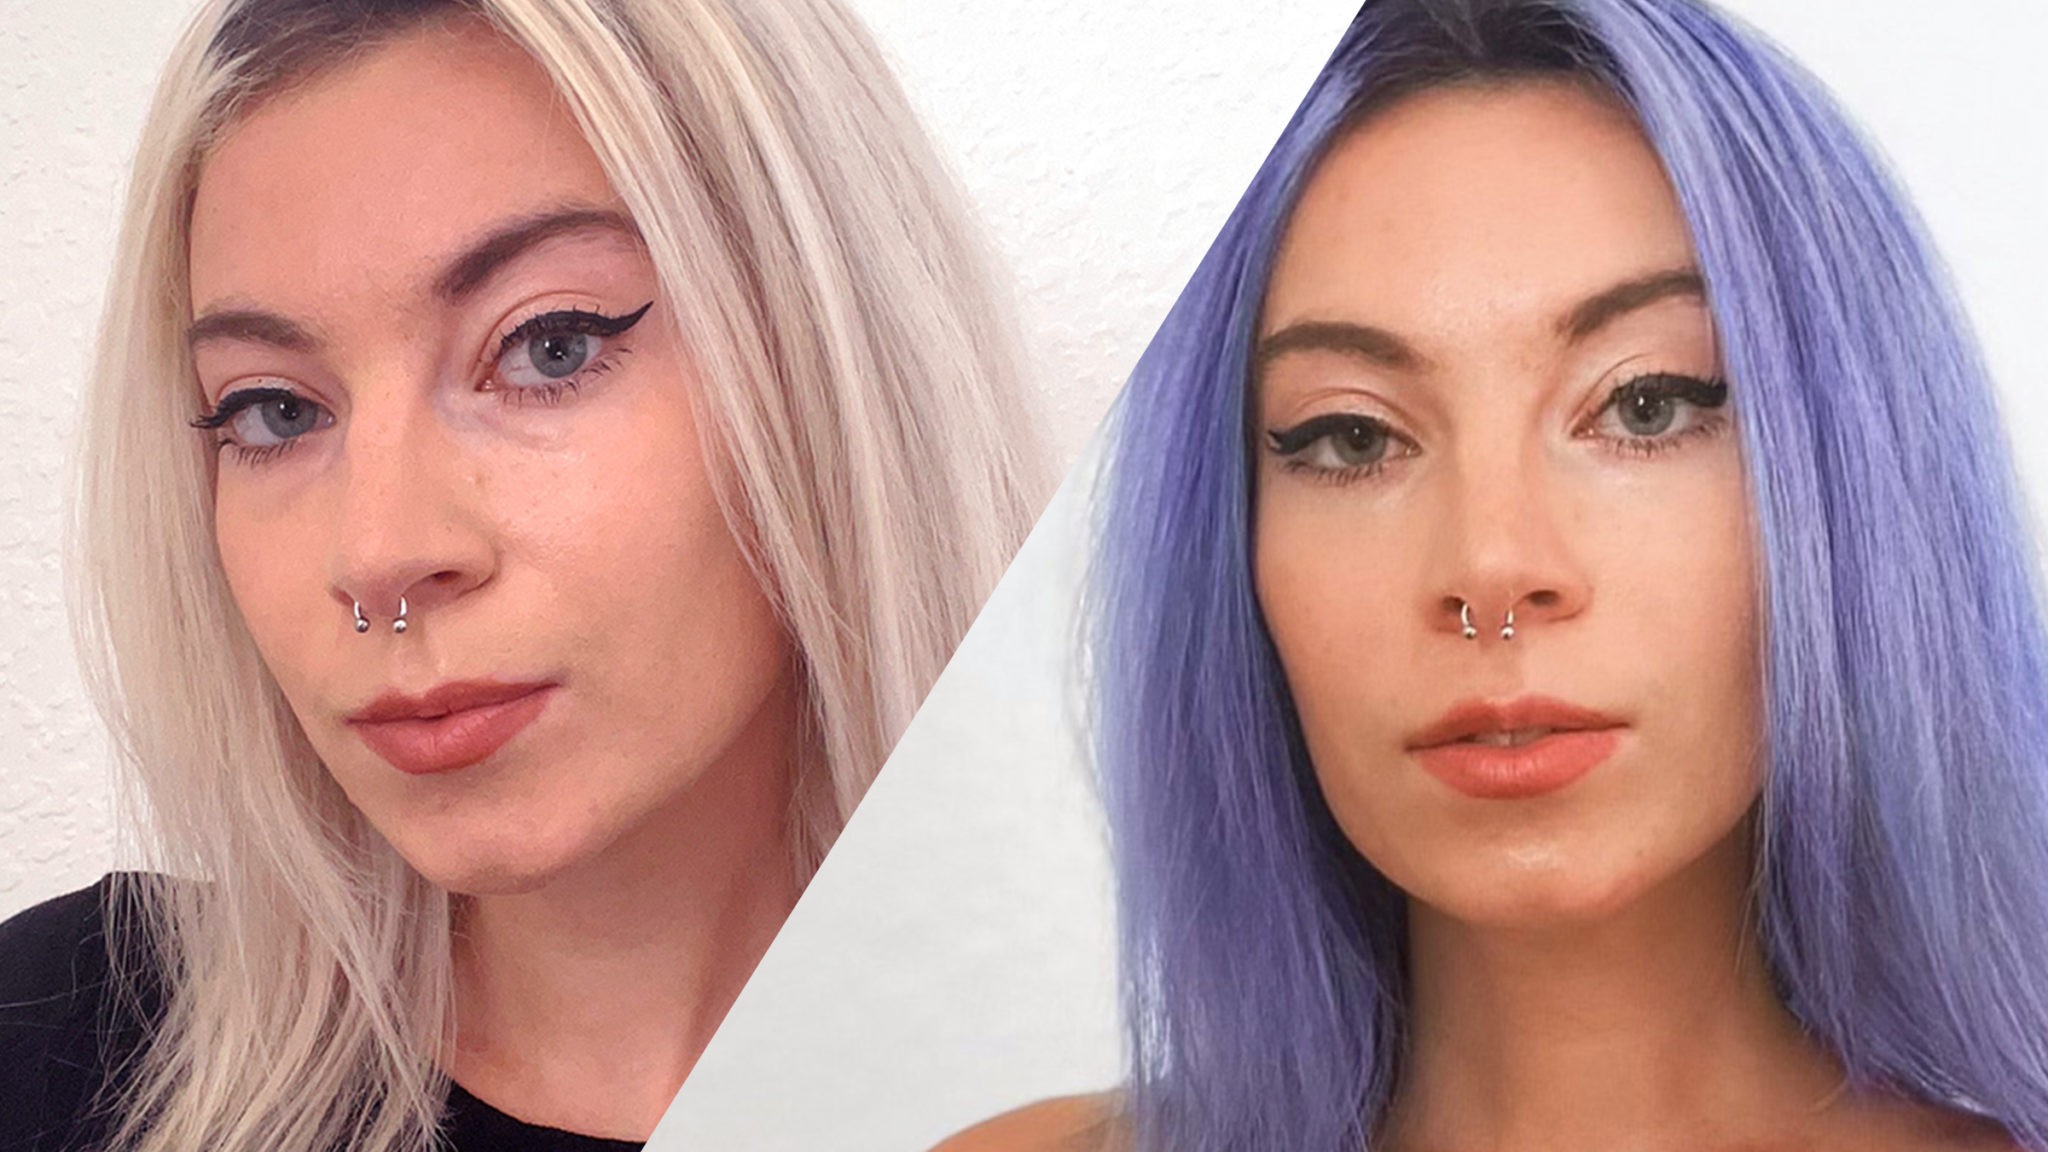 How to Get Periwinkle Hair in 5 Easy Steps